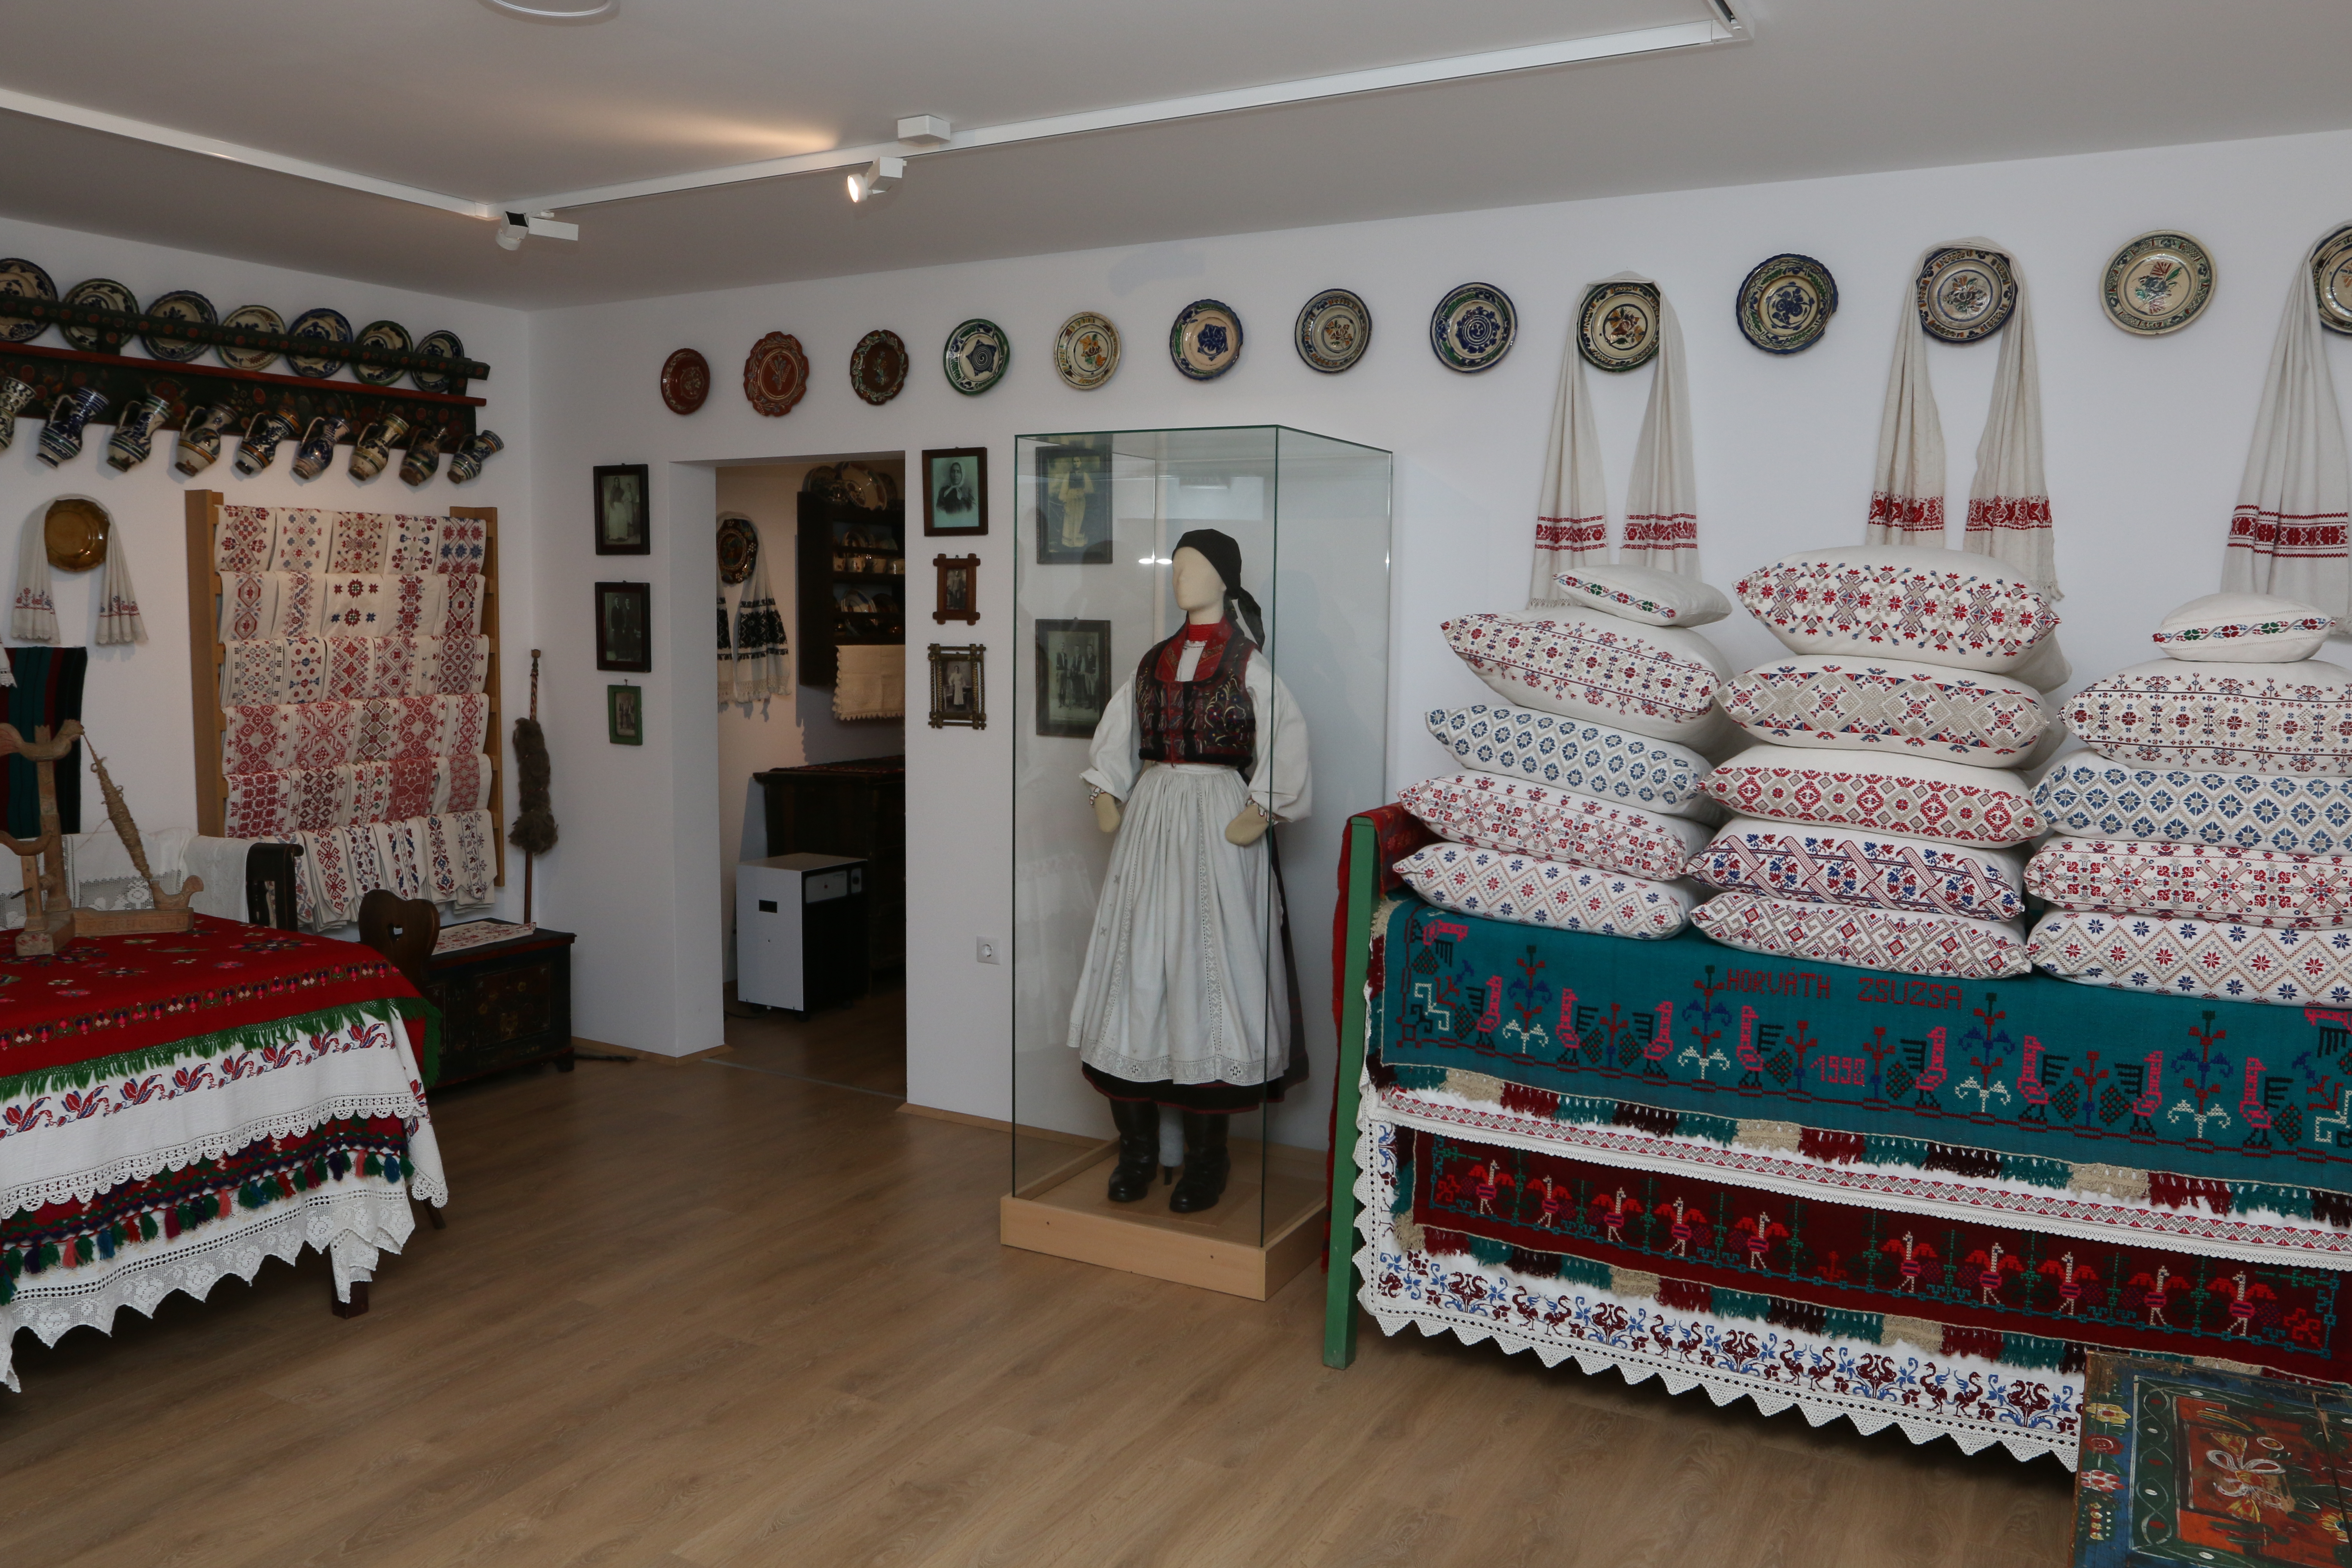 The “Clean Room” of Răscruci village at Zoltán Kallós Museum and Ethnographic Centre